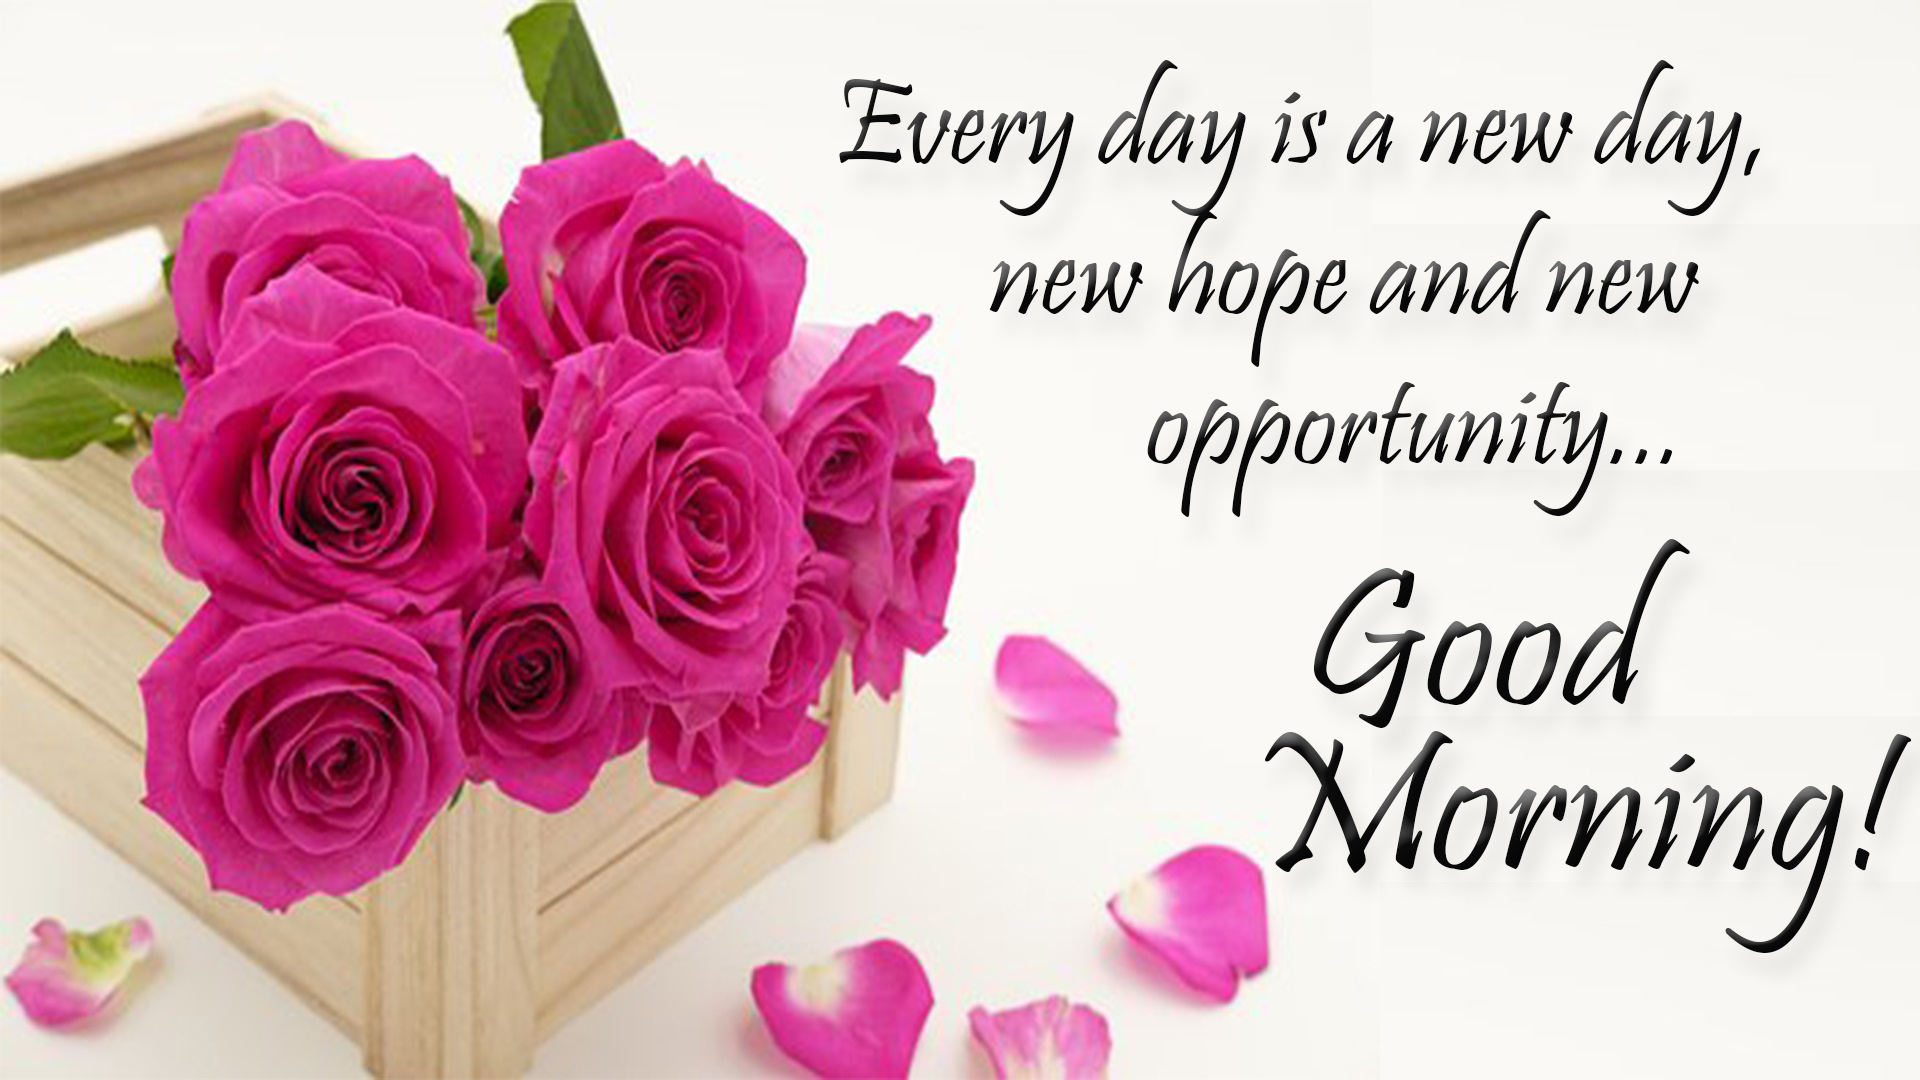 good morning quotes hd image